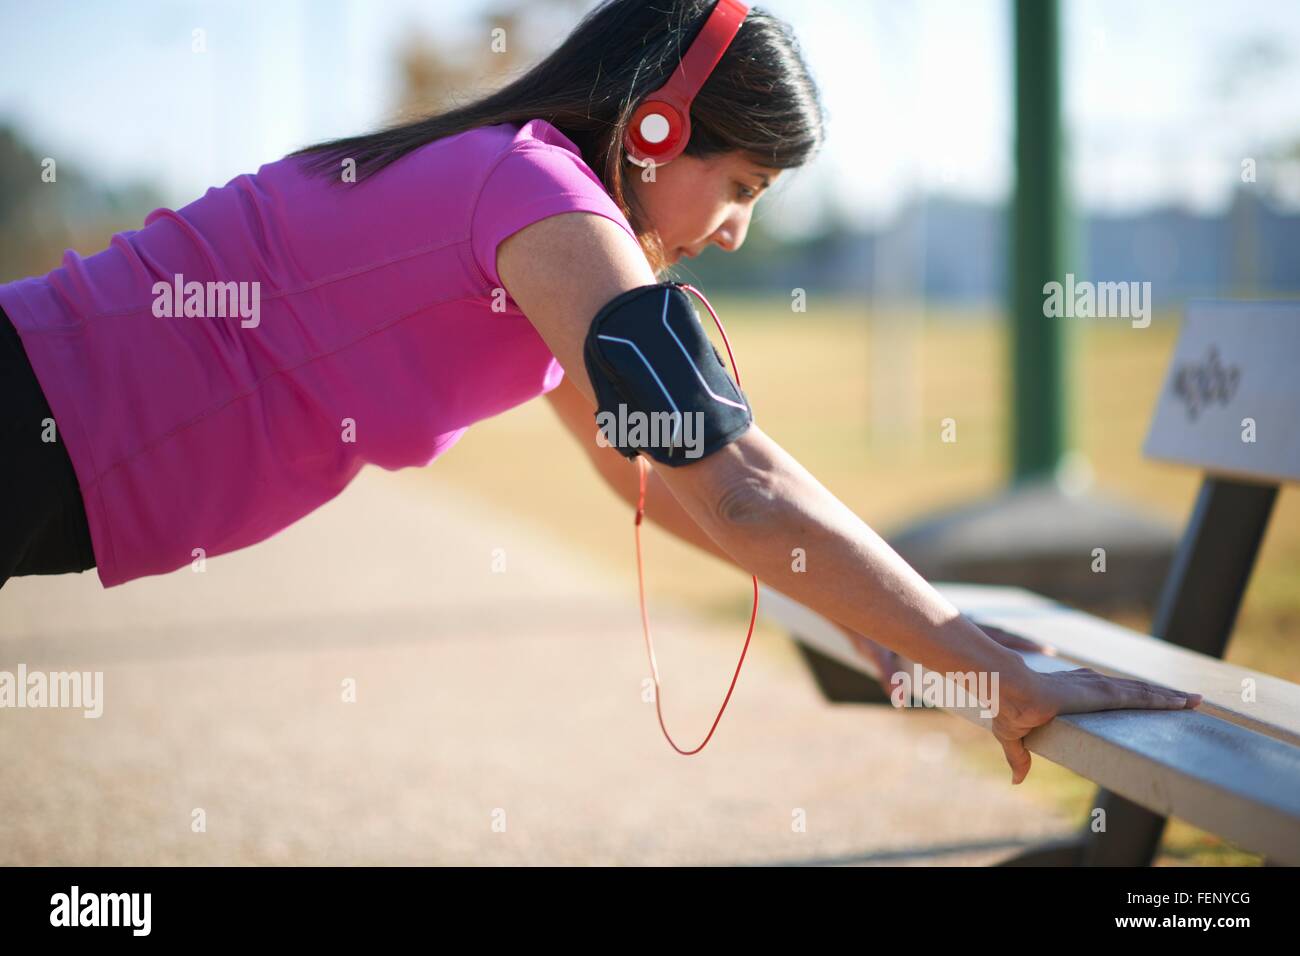 Side view of mature woman wearing headphones doing push up using park bench Stock Photo